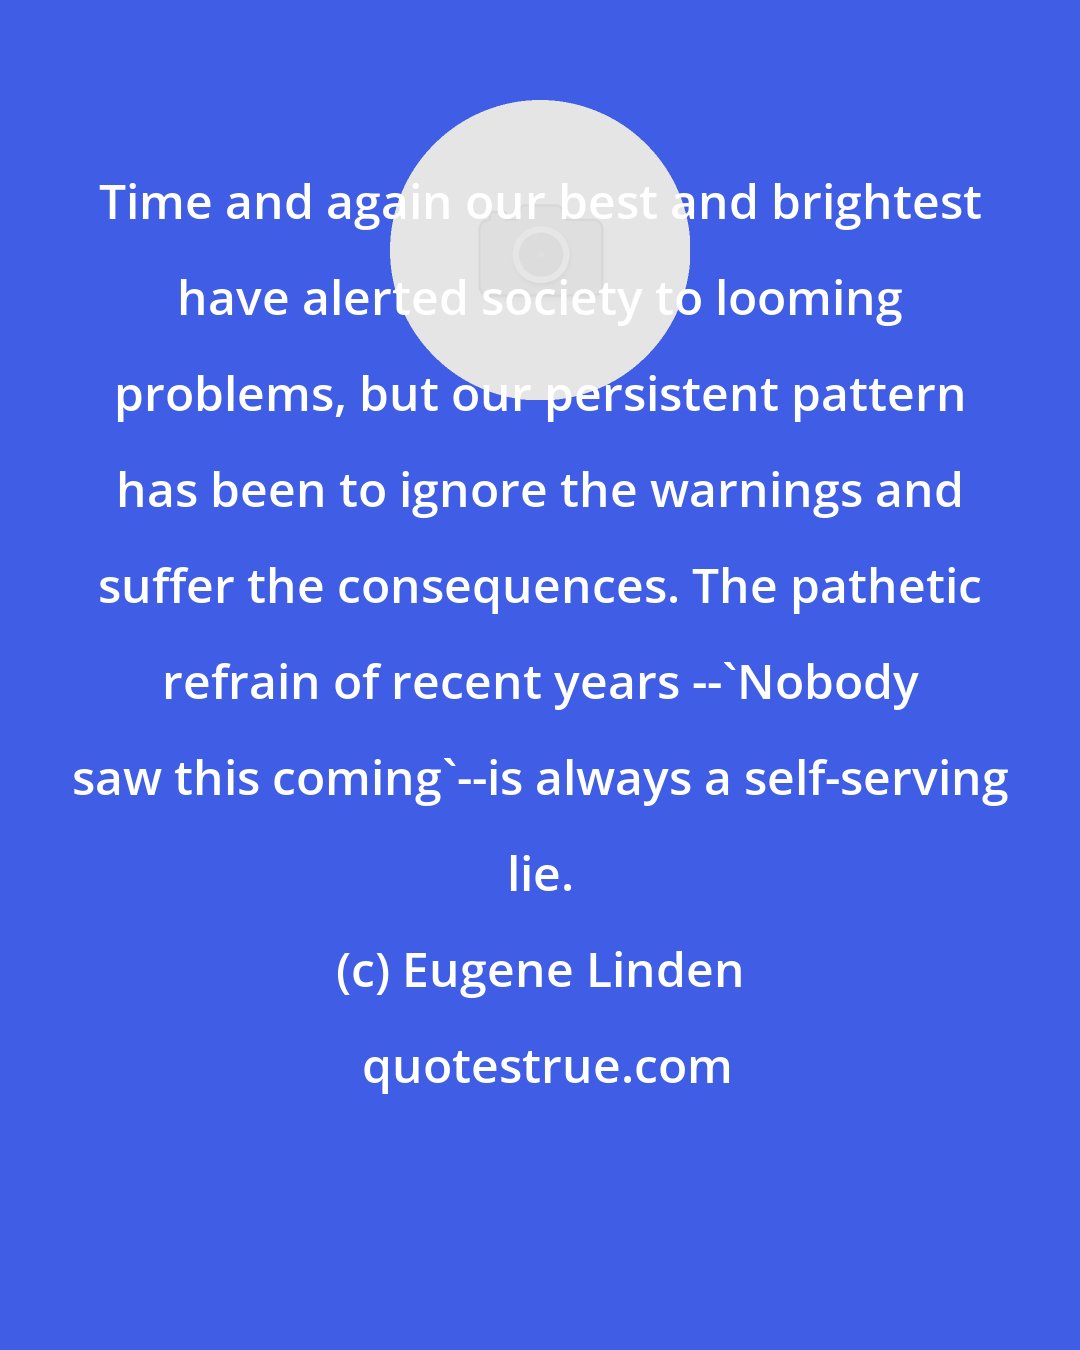 Eugene Linden: Time and again our best and brightest have alerted society to looming problems, but our persistent pattern has been to ignore the warnings and suffer the consequences. The pathetic refrain of recent years --'Nobody saw this coming'--is always a self-serving lie.